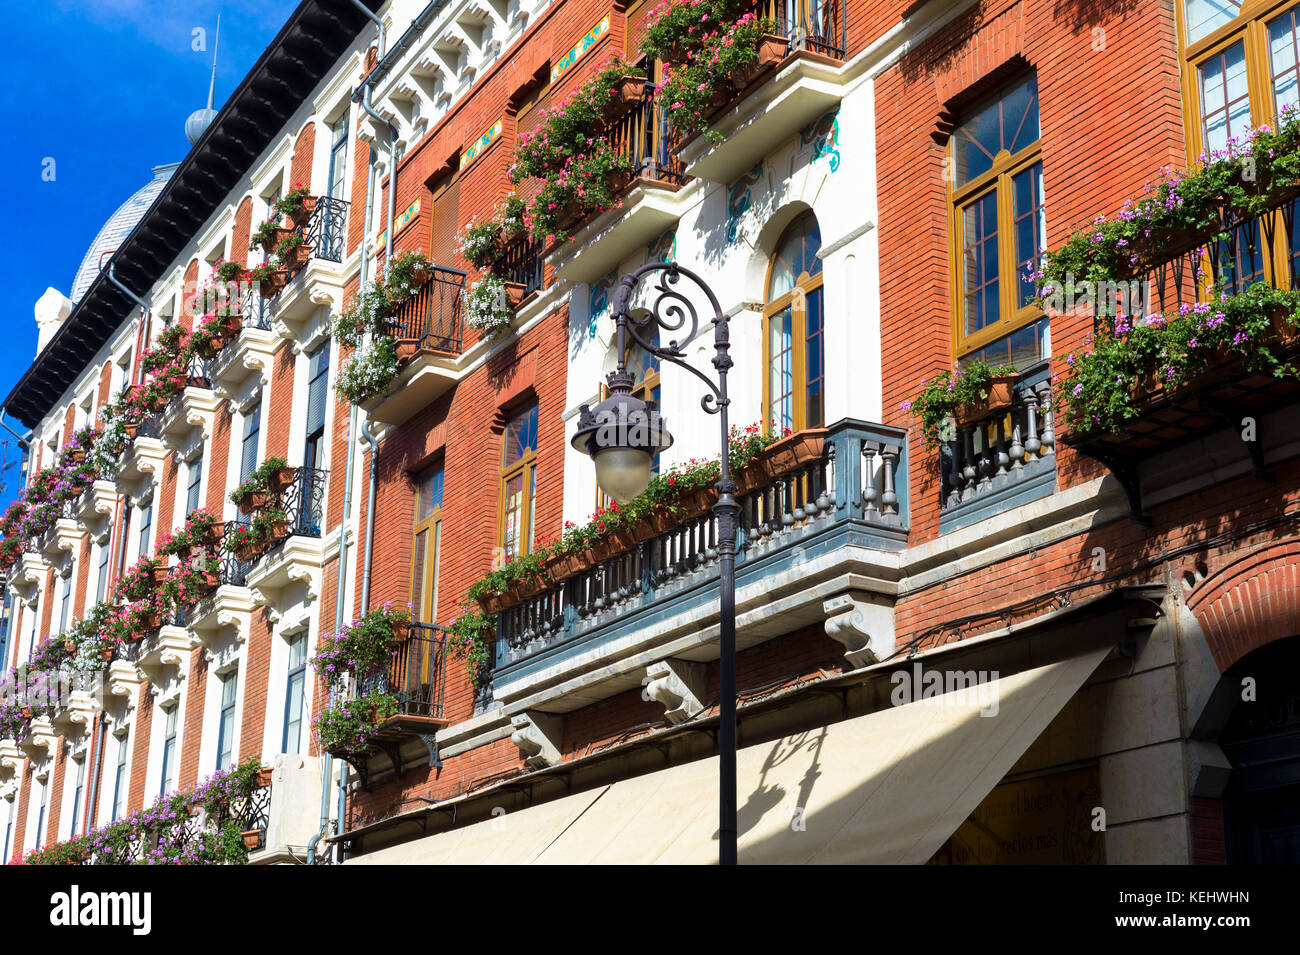 Window boxes and traditional architecture in Calle Ancha main street in Leon, Castilla y Leon, Spain Stock Photo